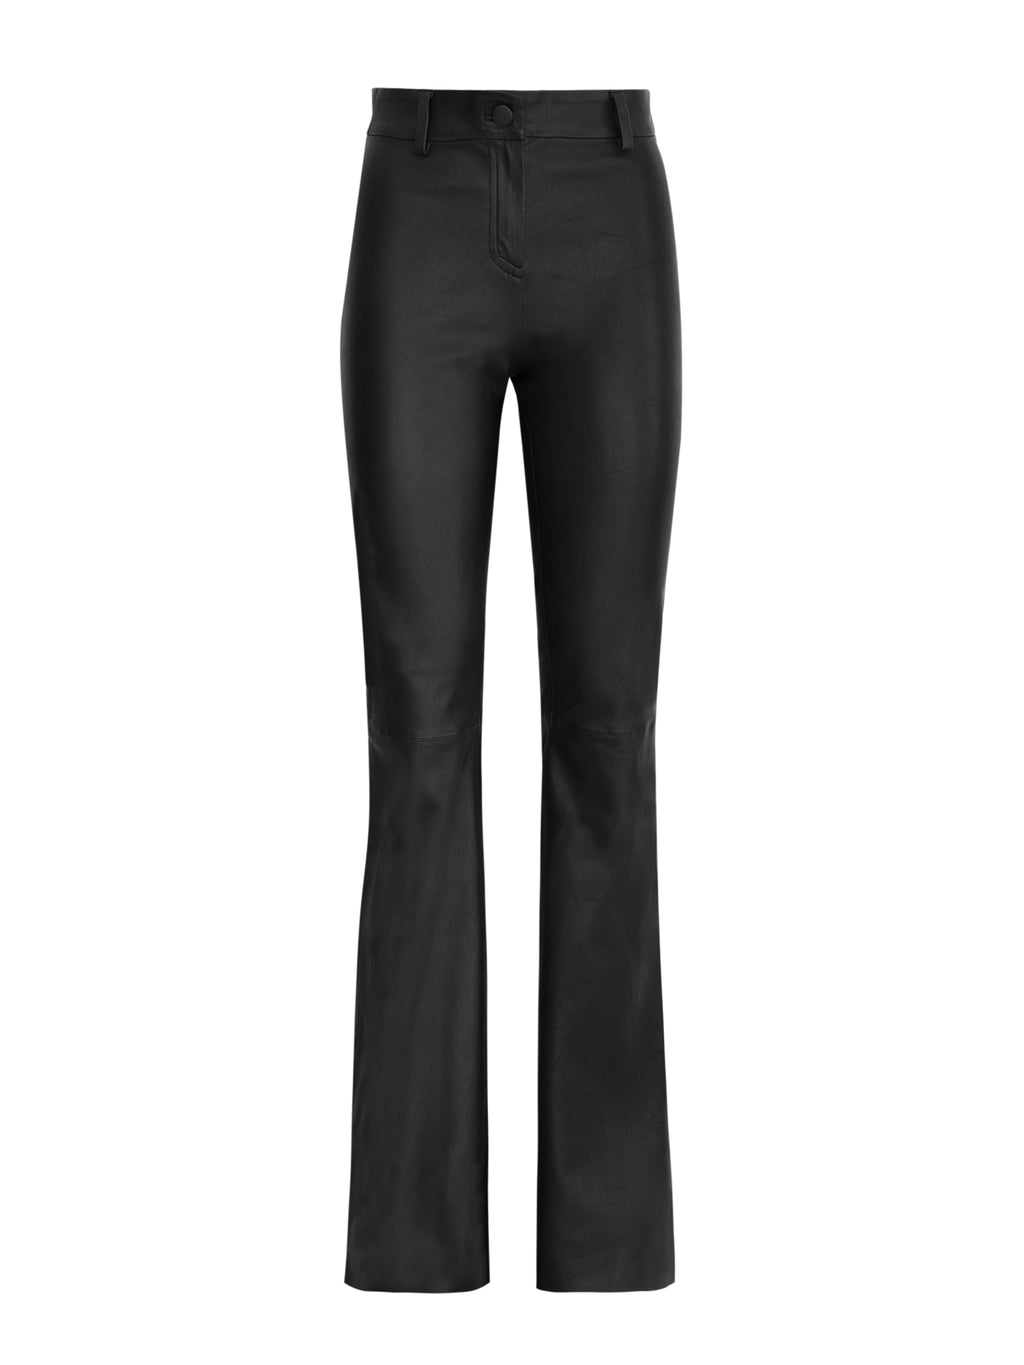 Bootcut stretch leather pants